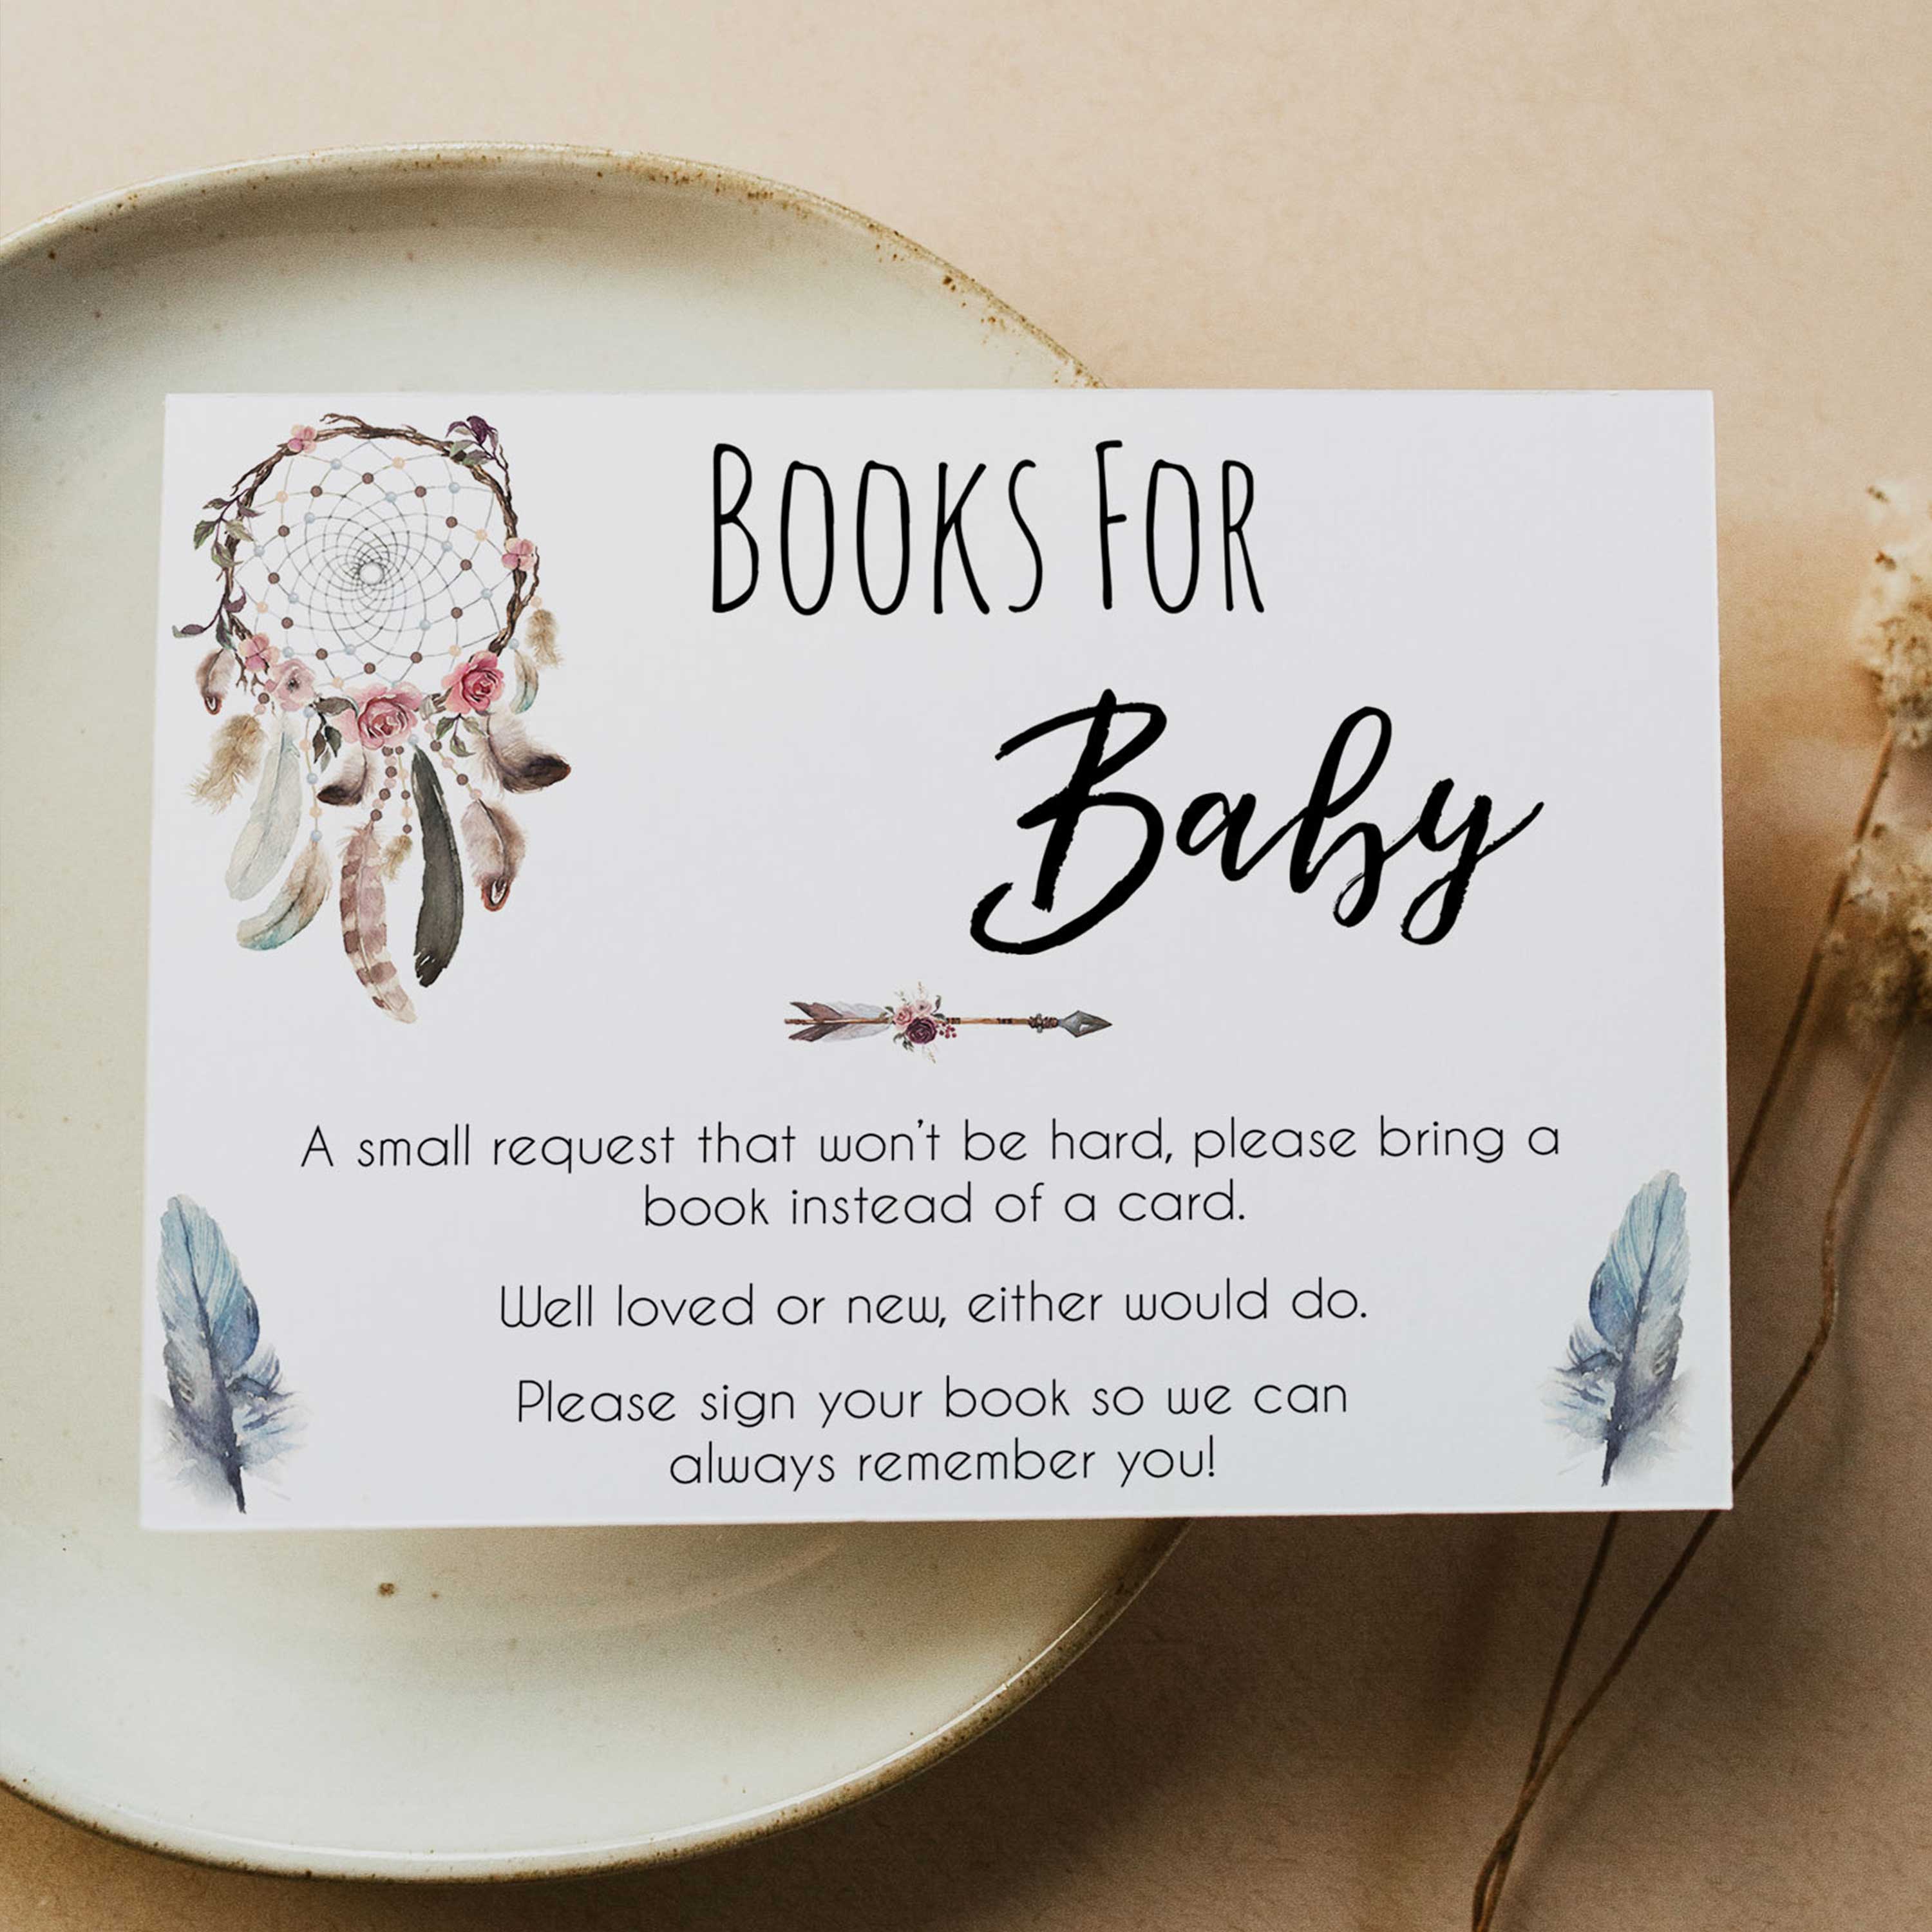 Boho baby games, books for baby baby game, fun baby games, printable baby games, top 10 baby games, boho baby shower, baby games, hilarious baby games